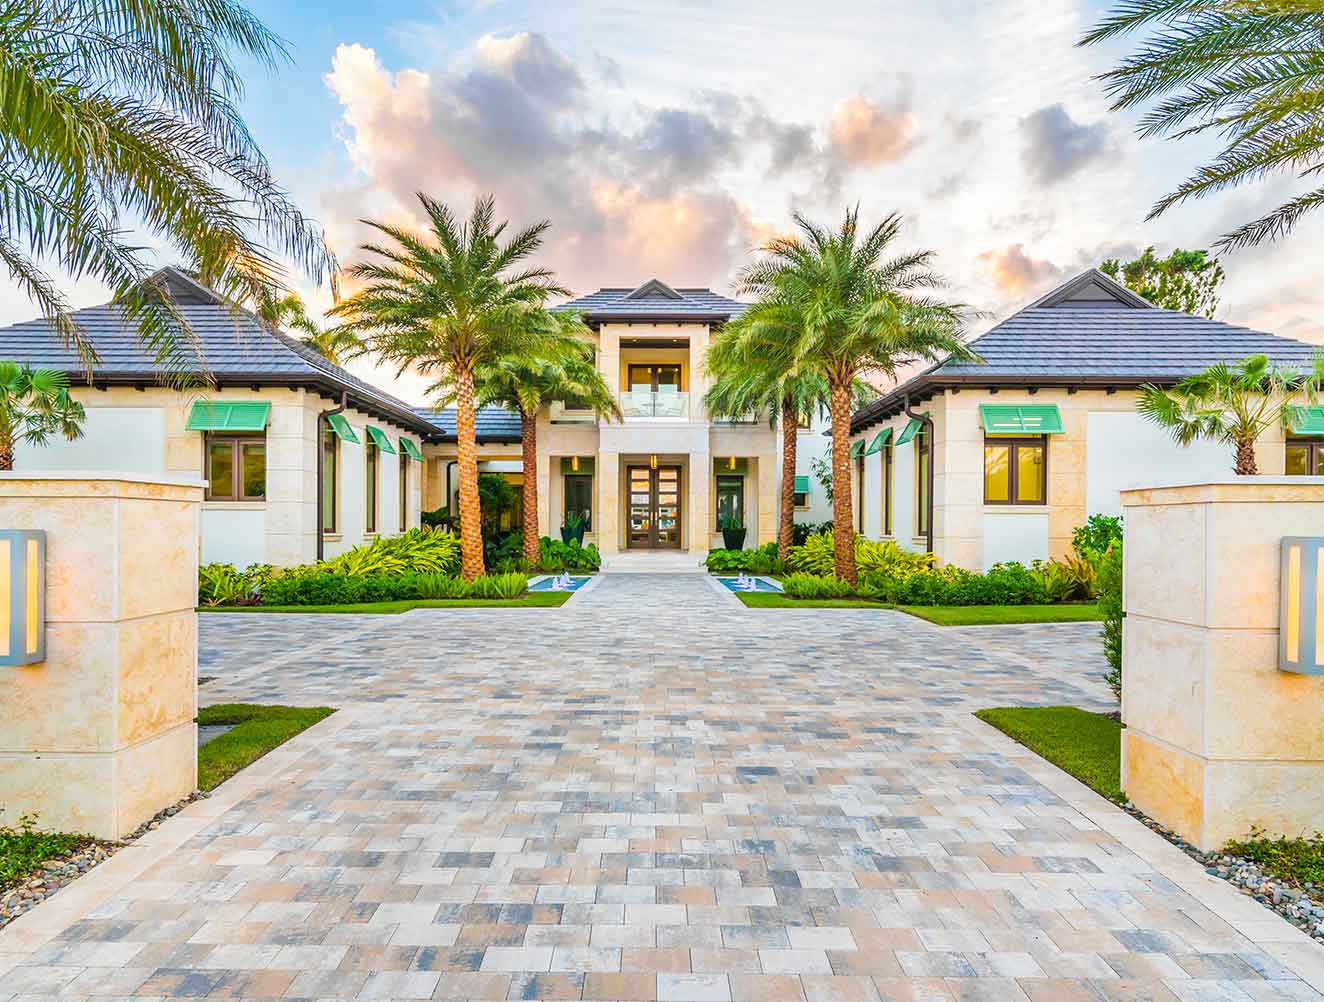 Entryway of Rum Row Estate in Naples Florida, single family home designed by Kukk Architecture & Design Naples Architecture Firm